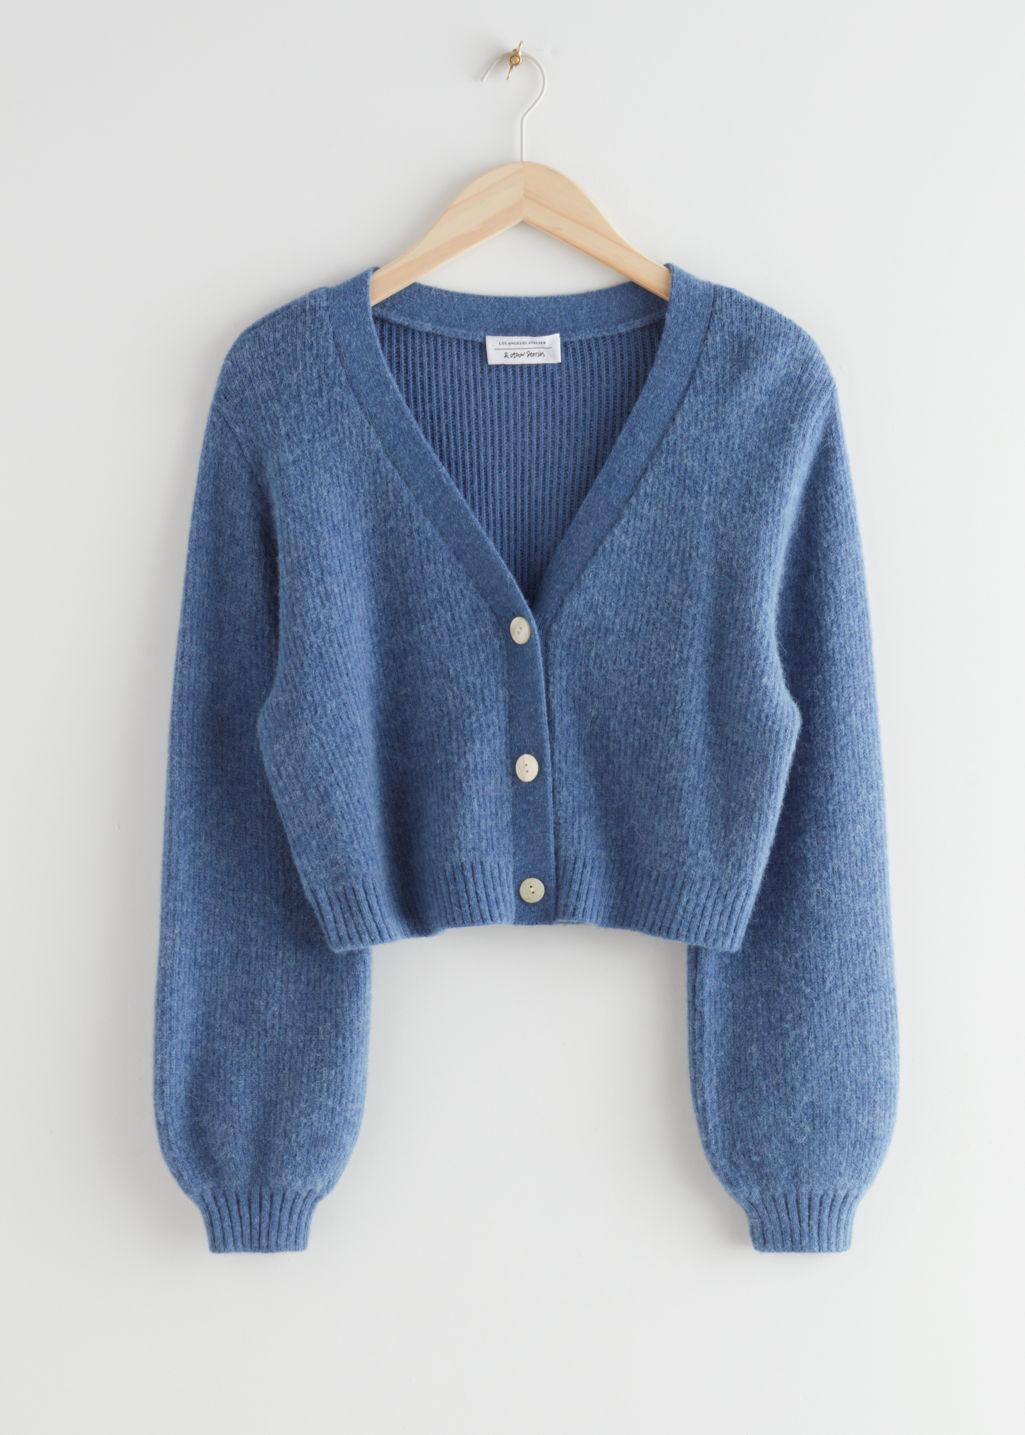 & Other Stories Cropped Boxy Knit Cardigan in Blue | Lyst